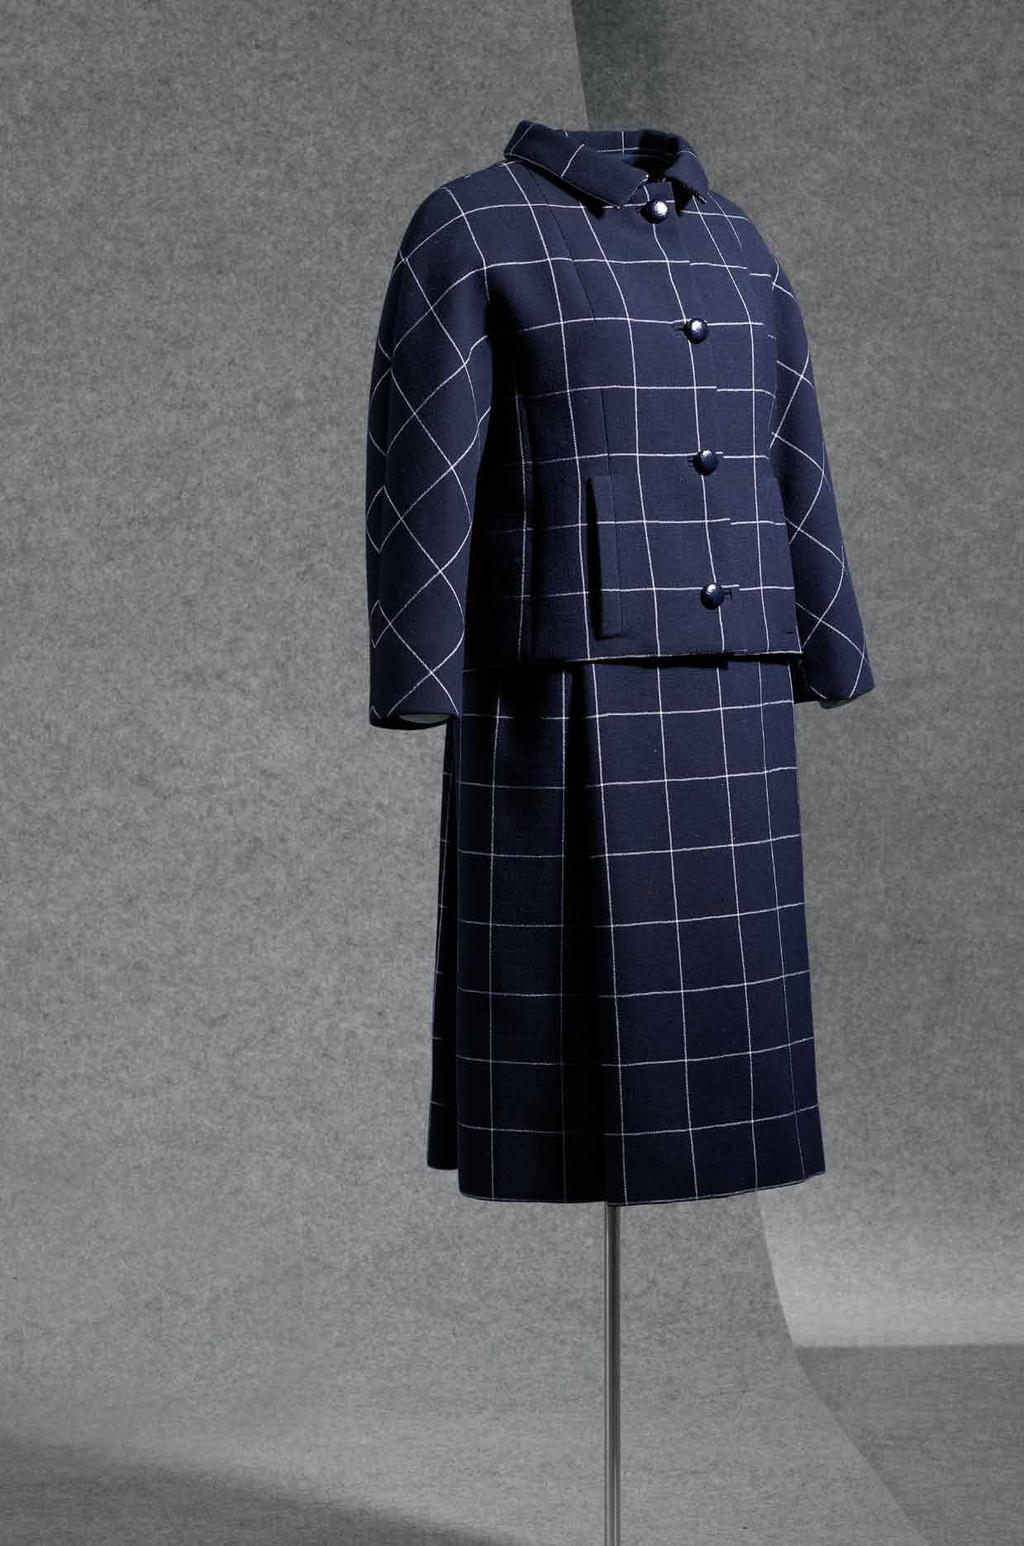 the collector Perfection and knowledge of the trade are categorically obvious in the sartorial suit in navy blue quadrillé, one of Mrs. Mellon s favourite colours.